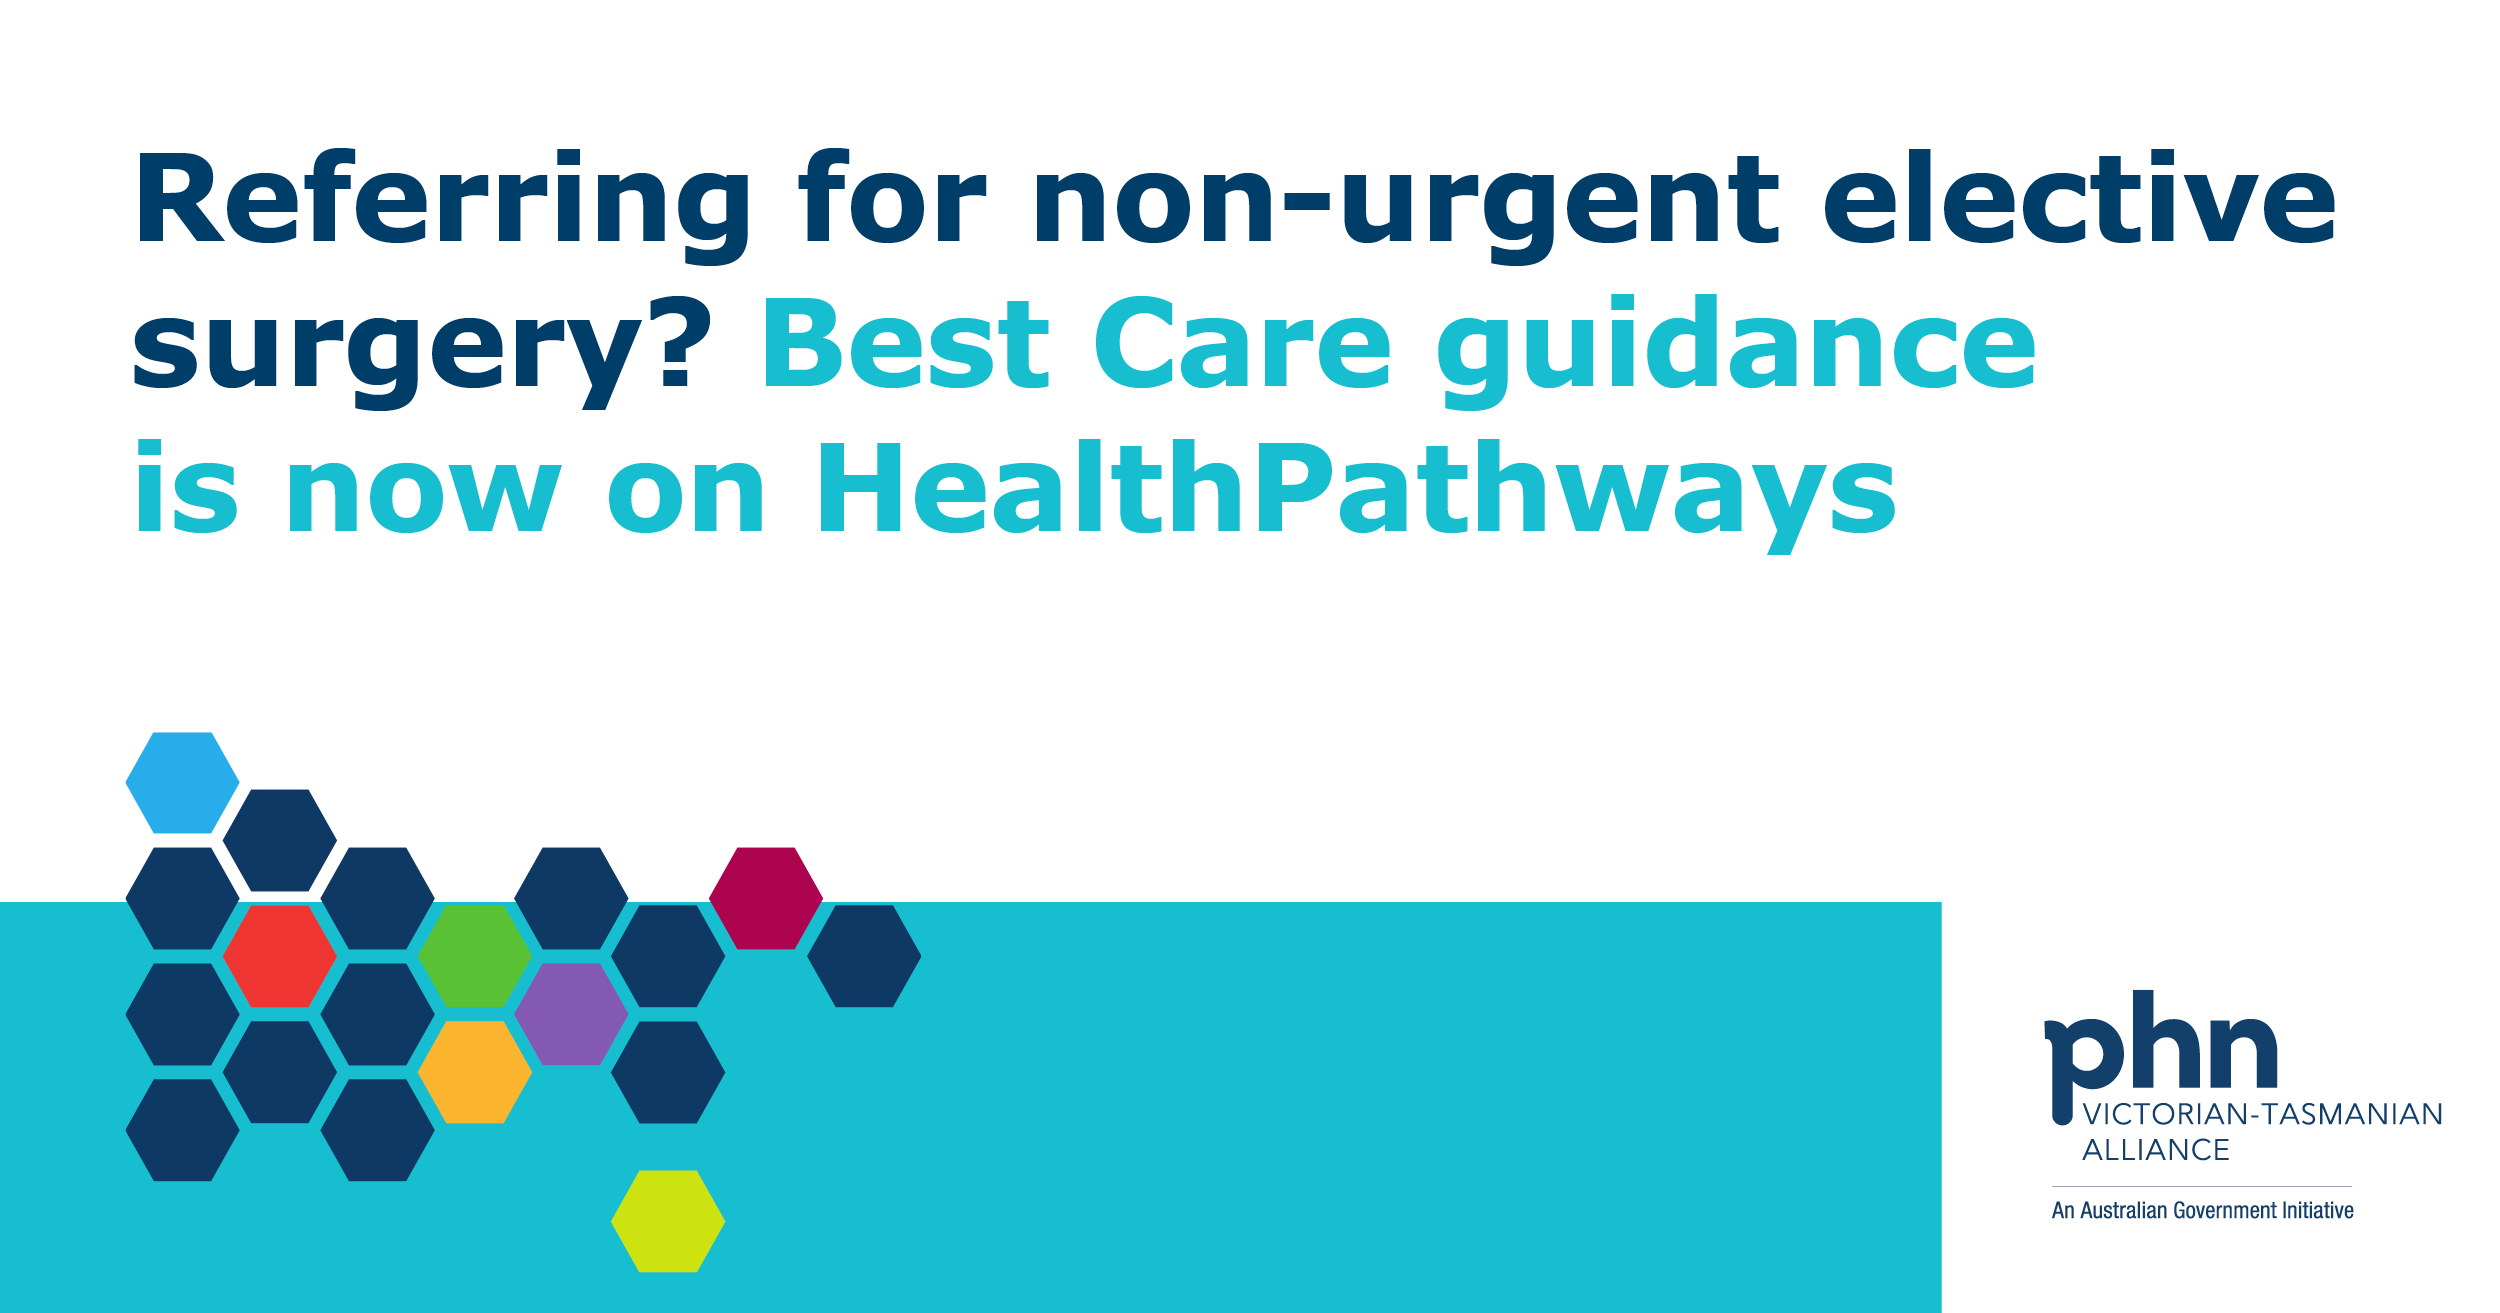 Best Care guidance for non-urgent elective surgery on HealthPathways Melbourne